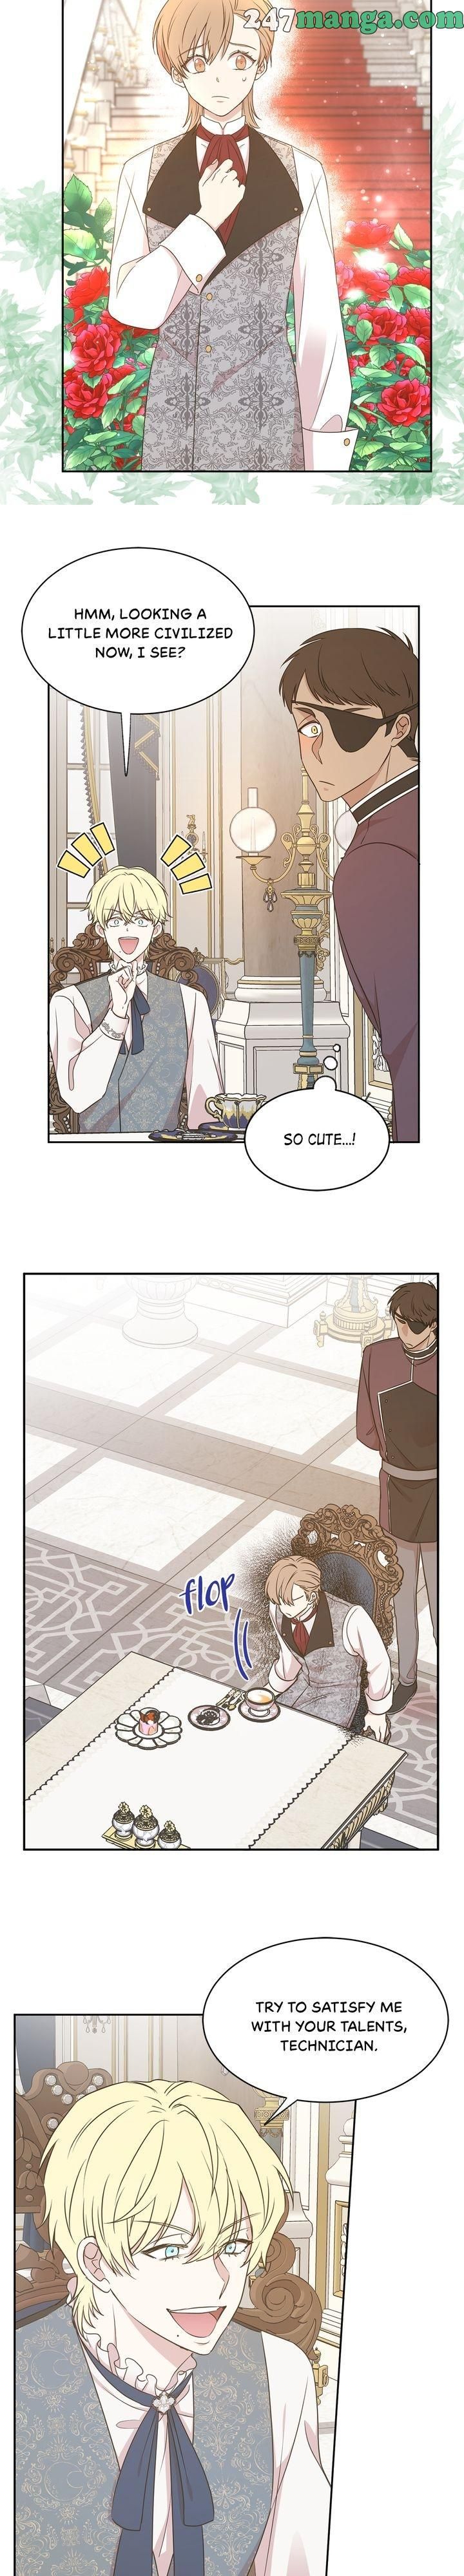 I Choose the Emperor Ending Chapter 96 page 7